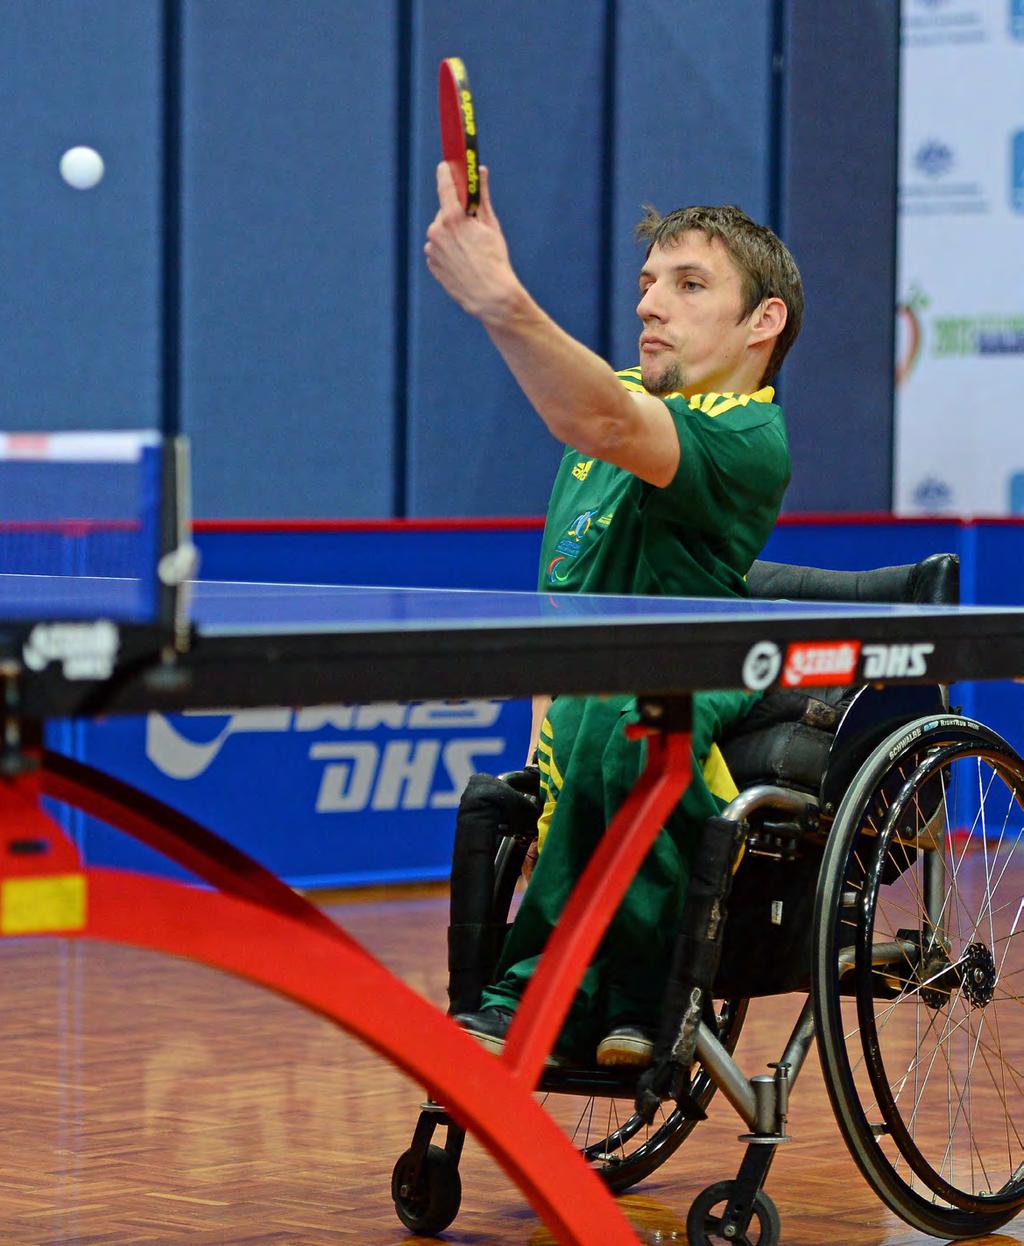 ITTF-OCEANIA EVENTS EVENT 5: ITTF-PTT OCEANIA PARA TABLE TENNIS REGIONAL CHAMPIONSHIPS PARALYMPIC GAMES QUALIFICATION & WORLD PARA TABLE TENNIS CHAMPIONSHIPS QUALIFICATION The ITTF-PTT Oceania Para